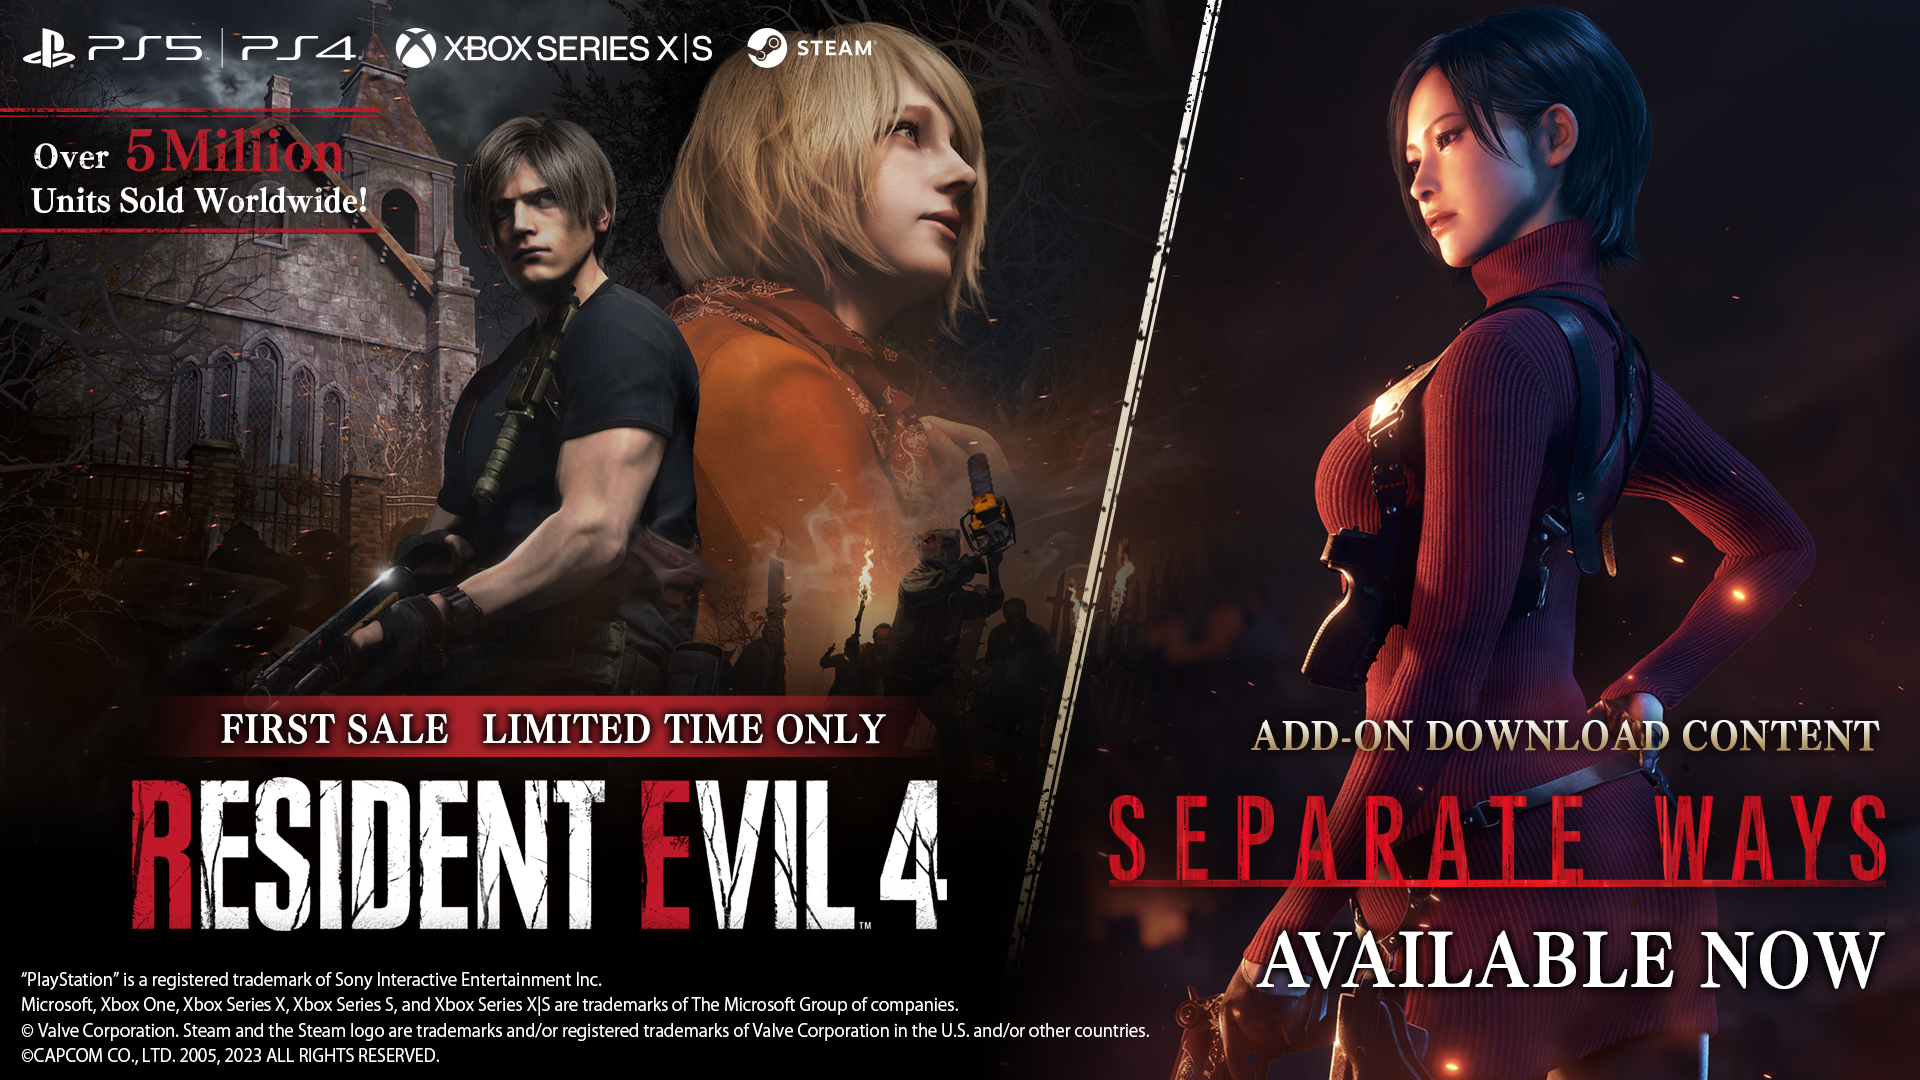 Additional story DLC for Resident Evil 4 out now, offers new exhilarating |  RYT9